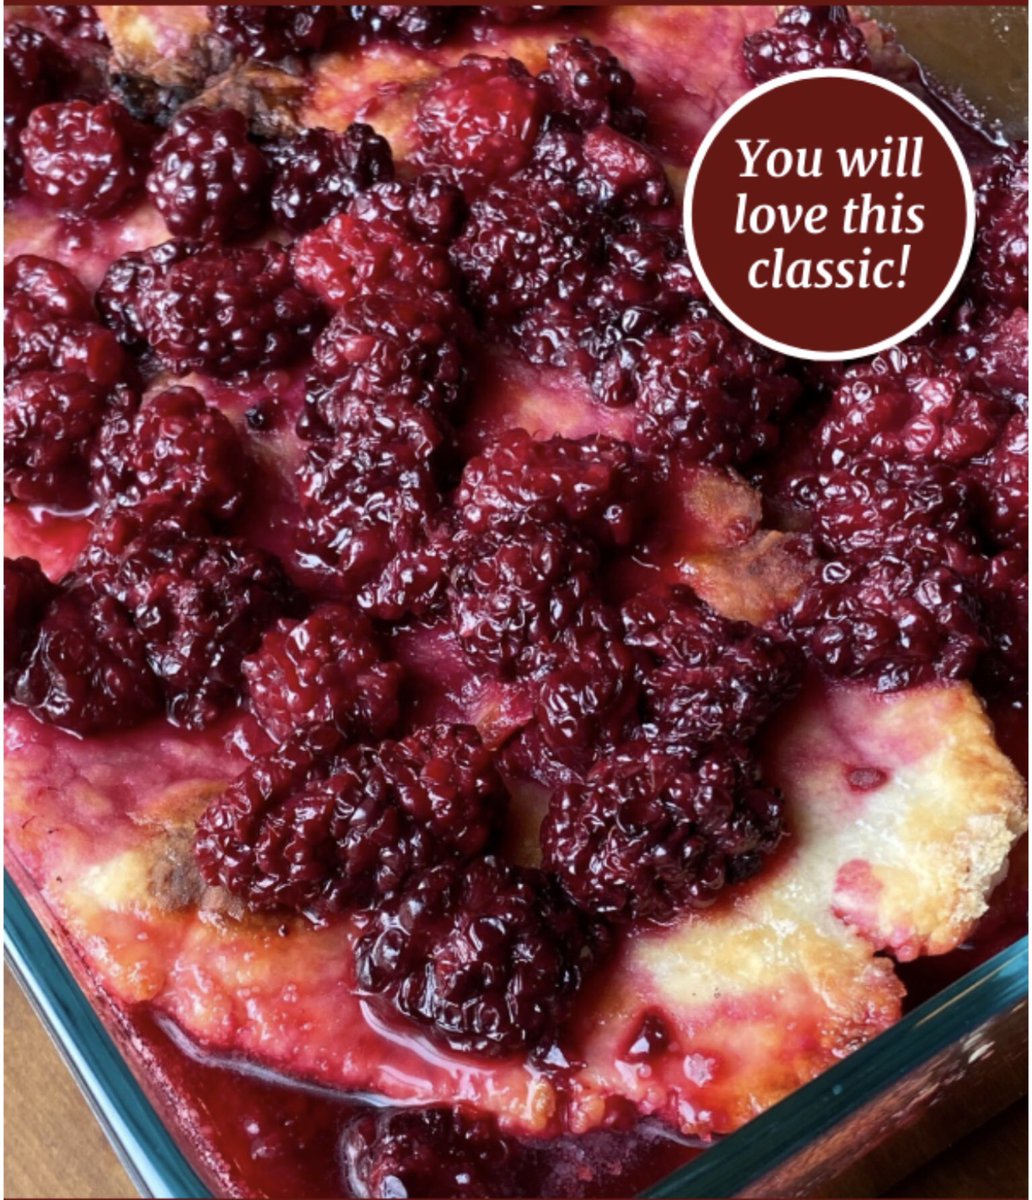 This old-fashioned blackberry cobbler has fantastic reviews and was our grandmother’s special recipe. It’s the best cobbler ever.  #blackberries #cobbler #cooking #homemaderecipes 

Recipe➡️ thesouthernladycooks.com/deep-dish-blac…